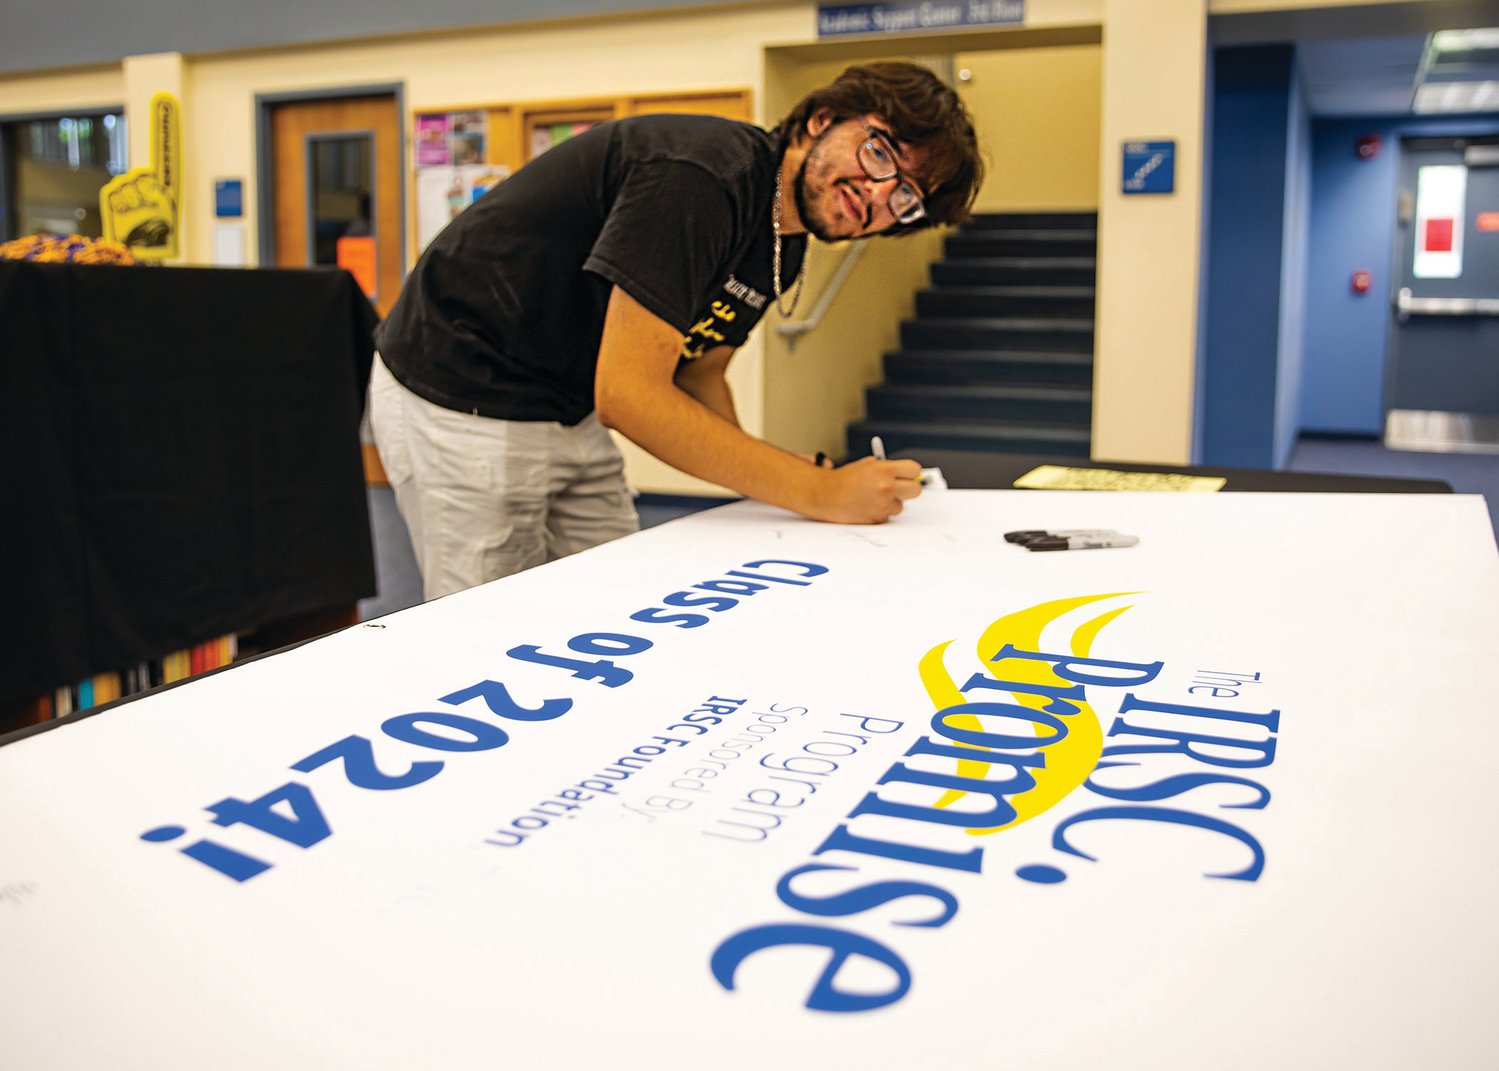 High school seniors in the class of 2023 can learn more about the IRSC Promise and take the pledge at promise.irsc.edu.